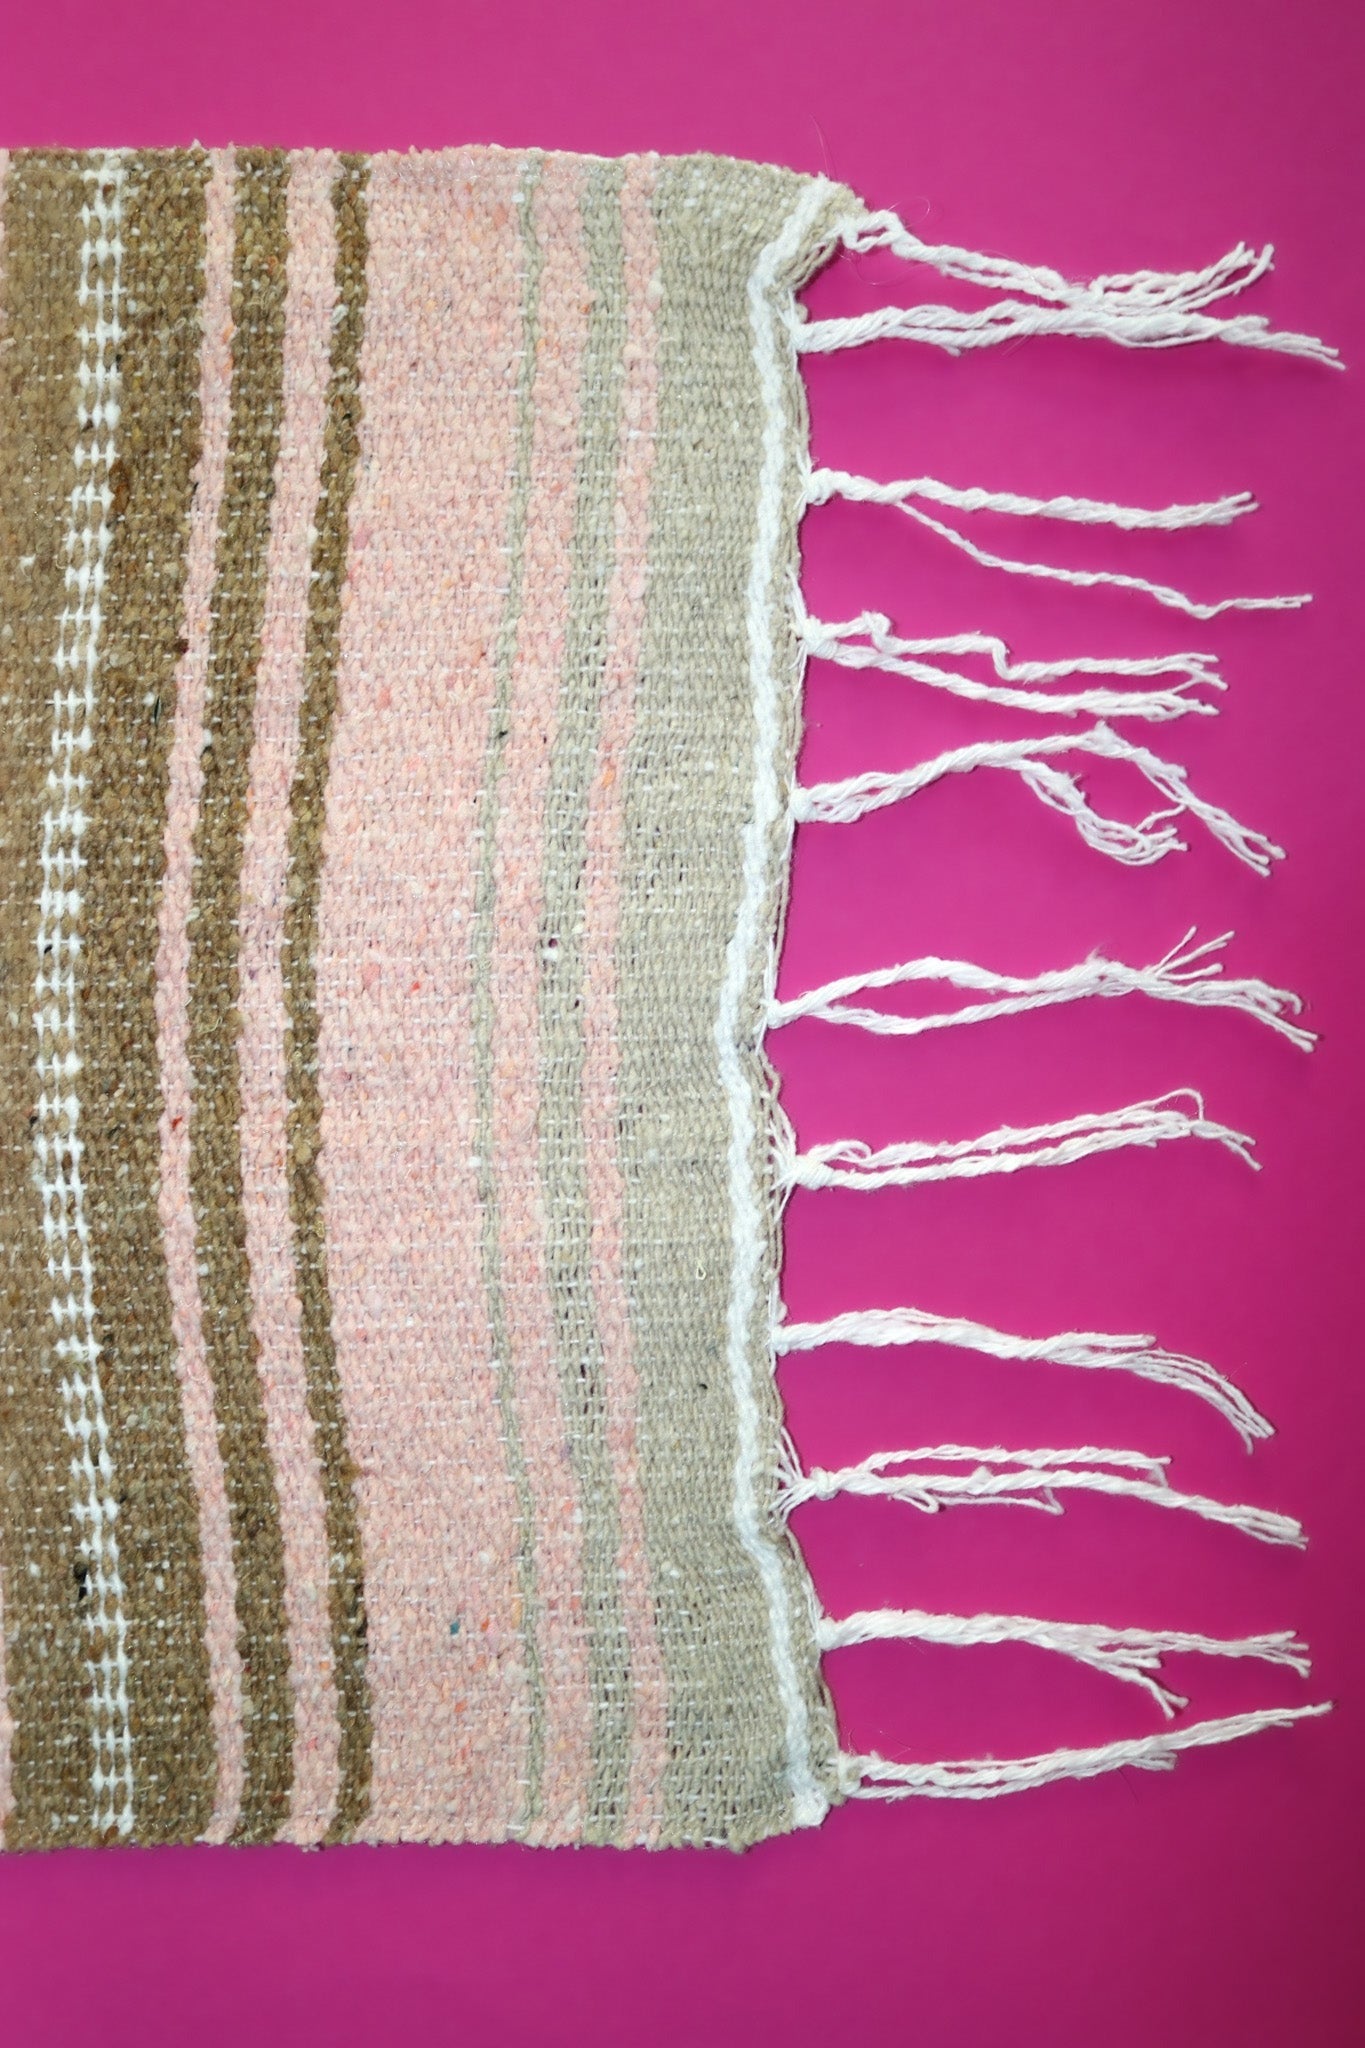 Bohemian Rustic Pastel Table Runner with Fringe